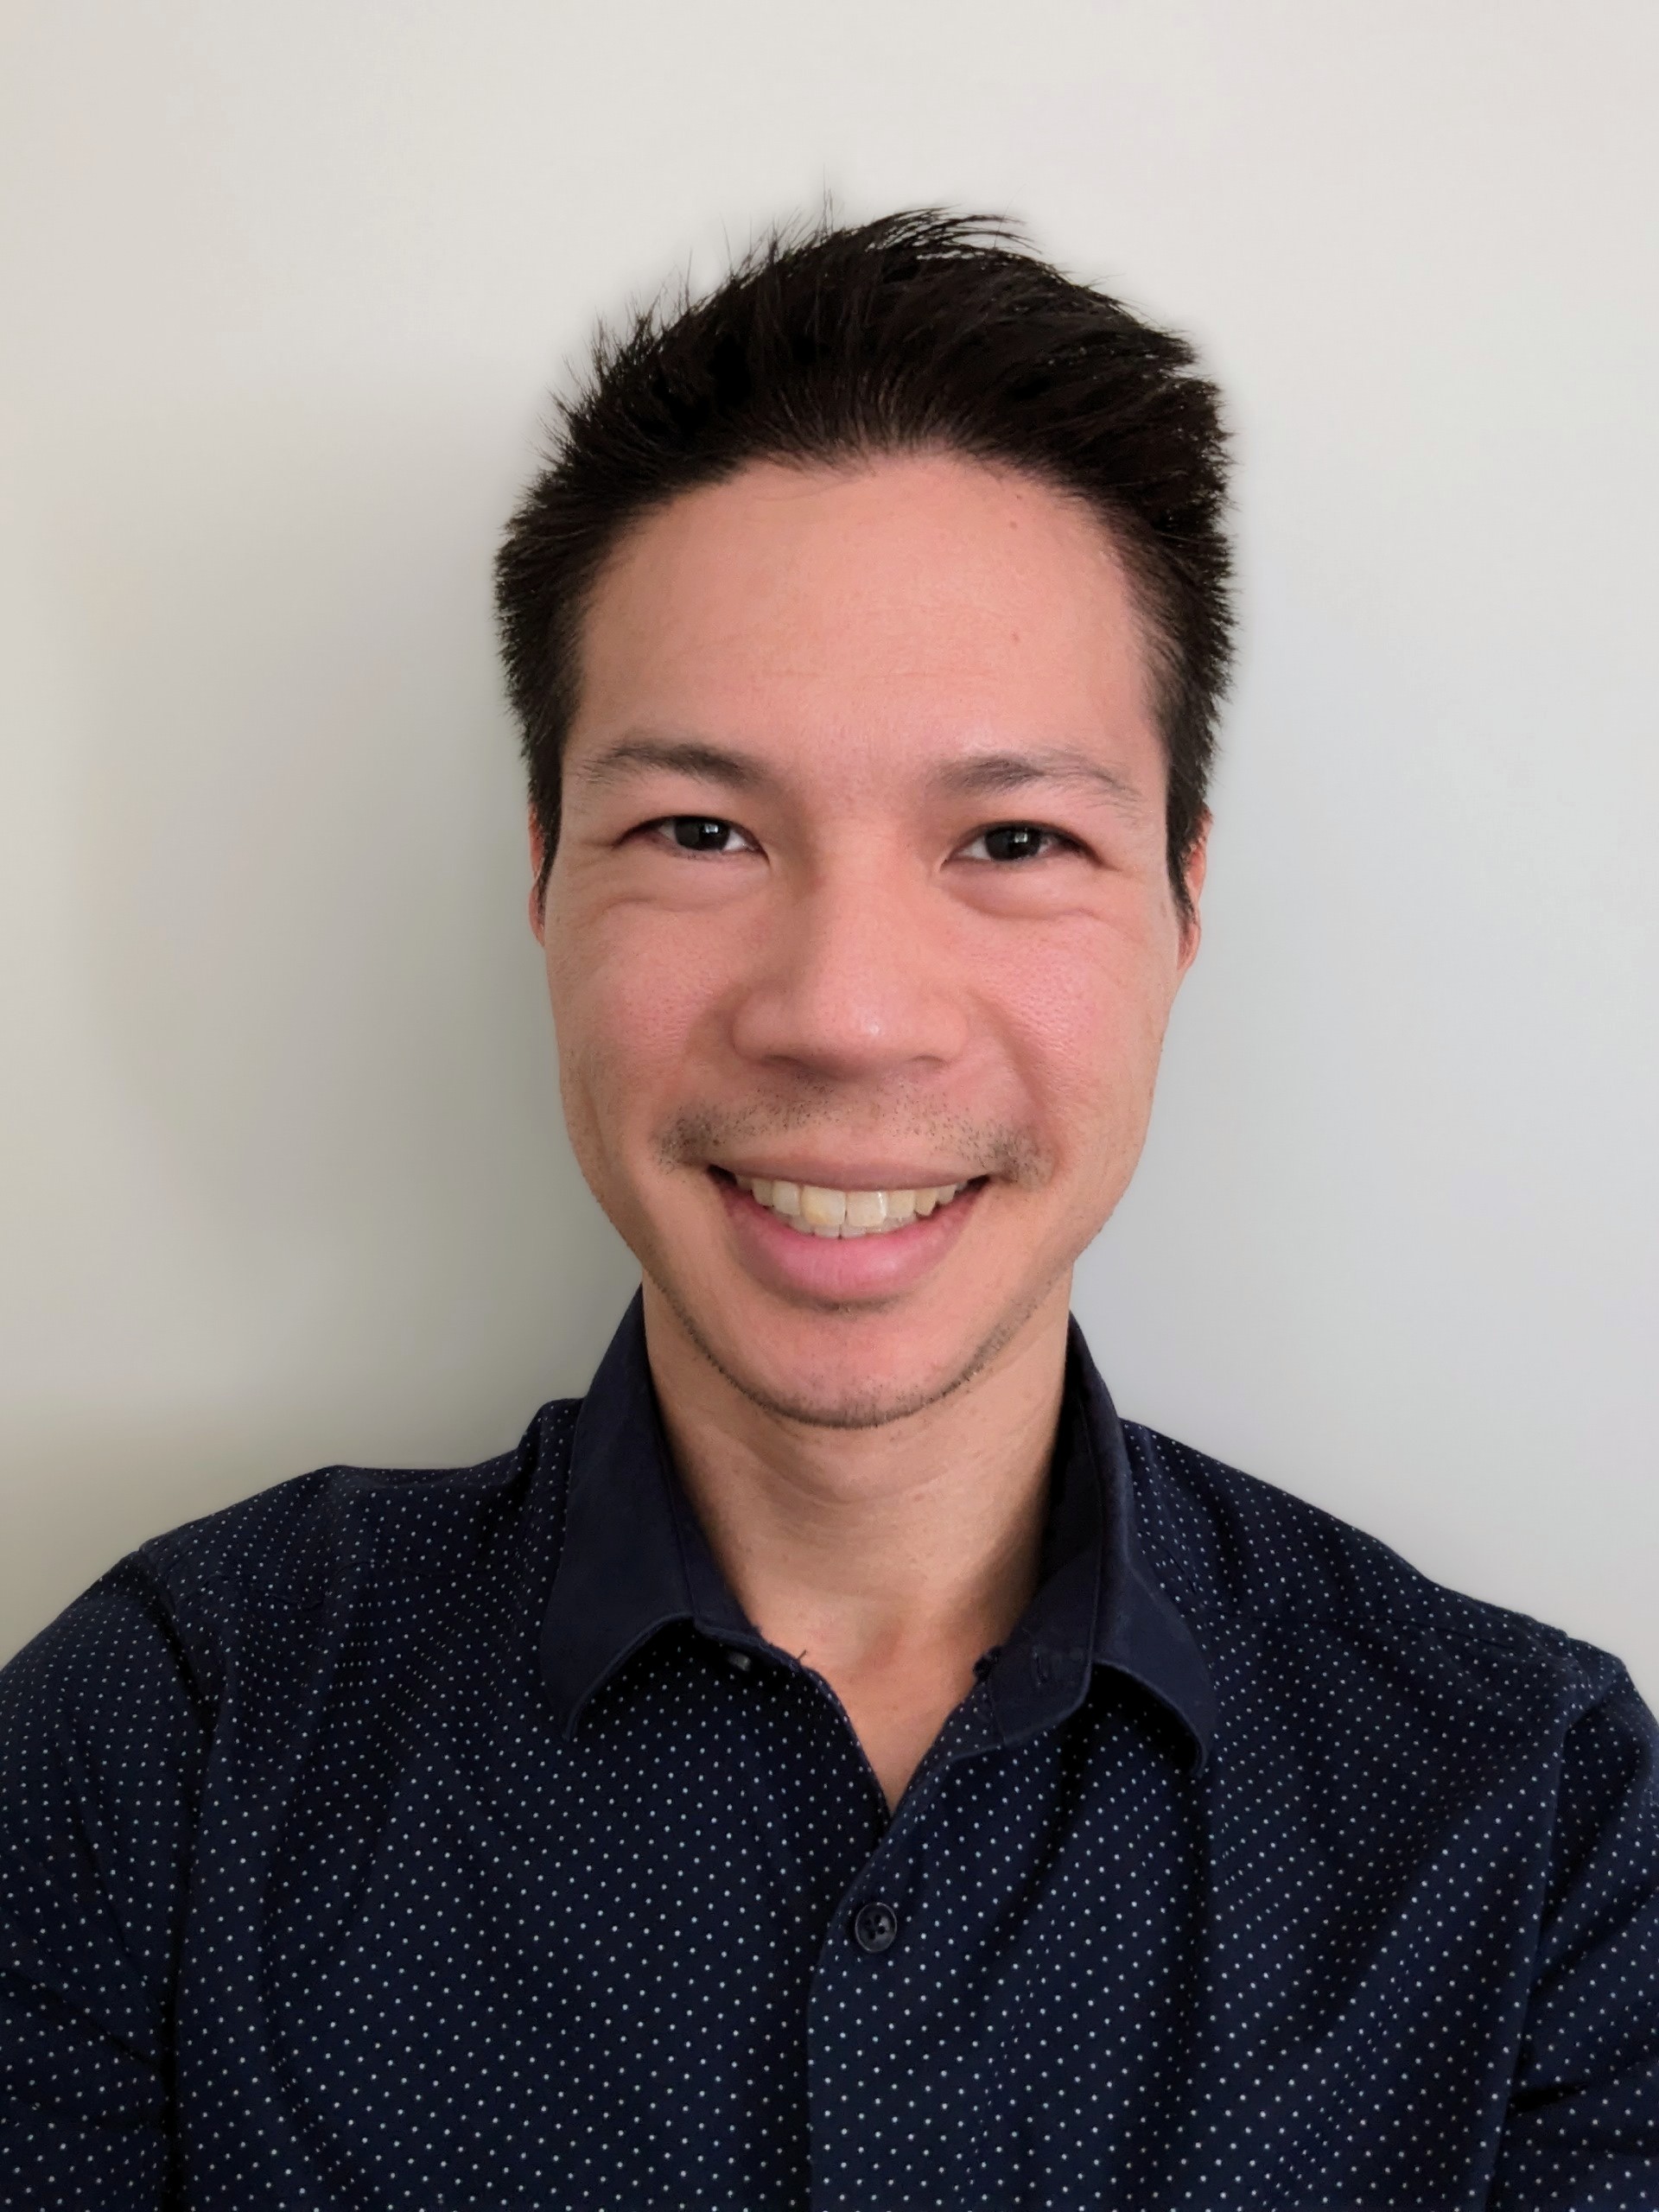 portrait photo of Francis, an Australian man with South-East Asian heritage. He is wearing a dark collared shirt, has short, black hair and dark coloured eyes and has a welcoming smile on his face